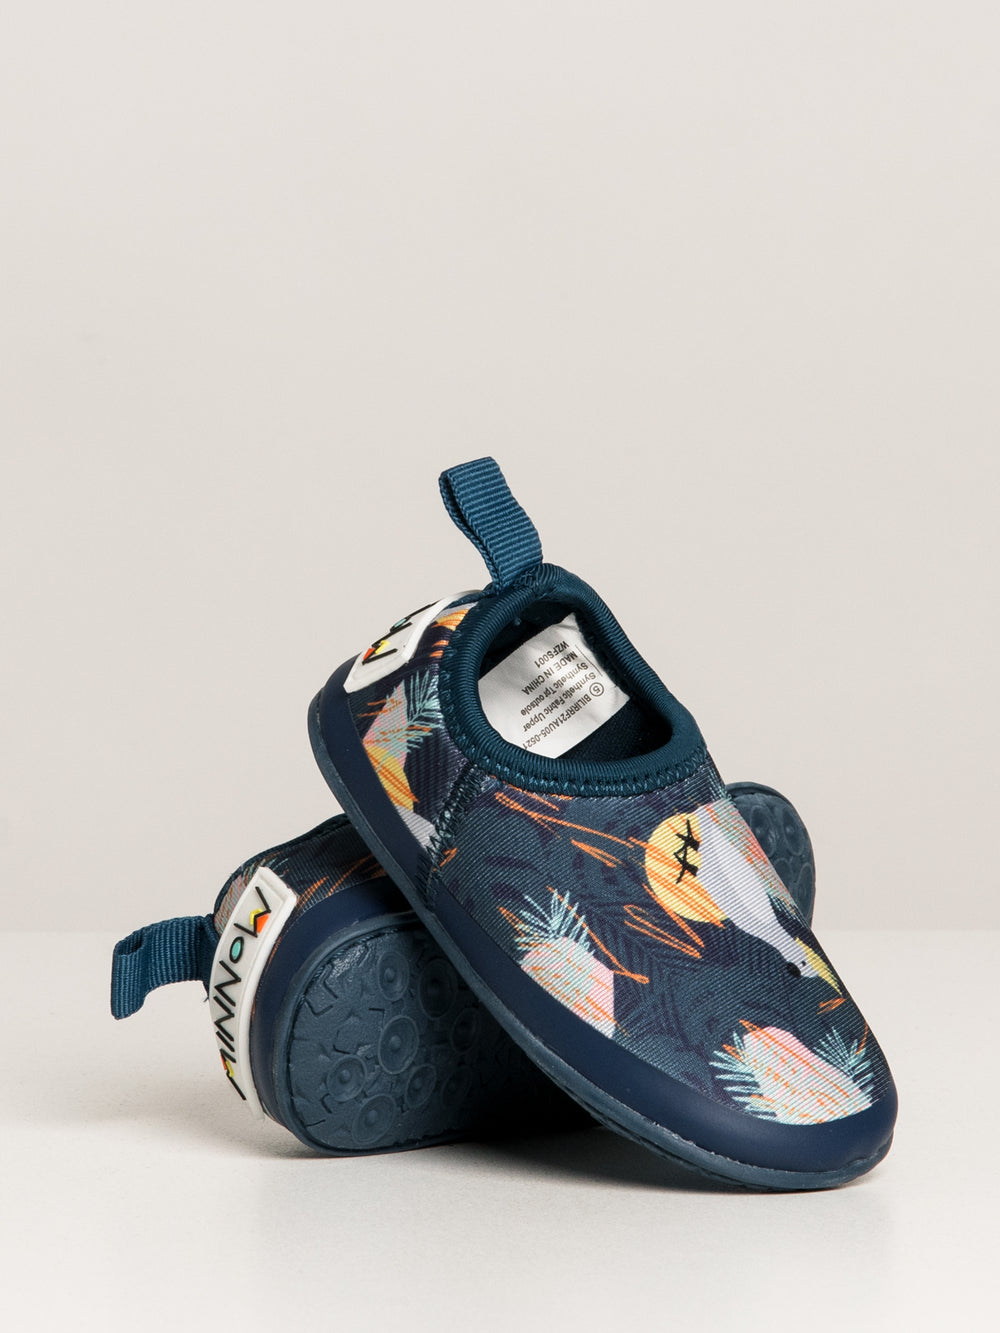 MINNOW DESIGNS TODDLER FLEX SWIMMABLE SHOE - CLEARANCE